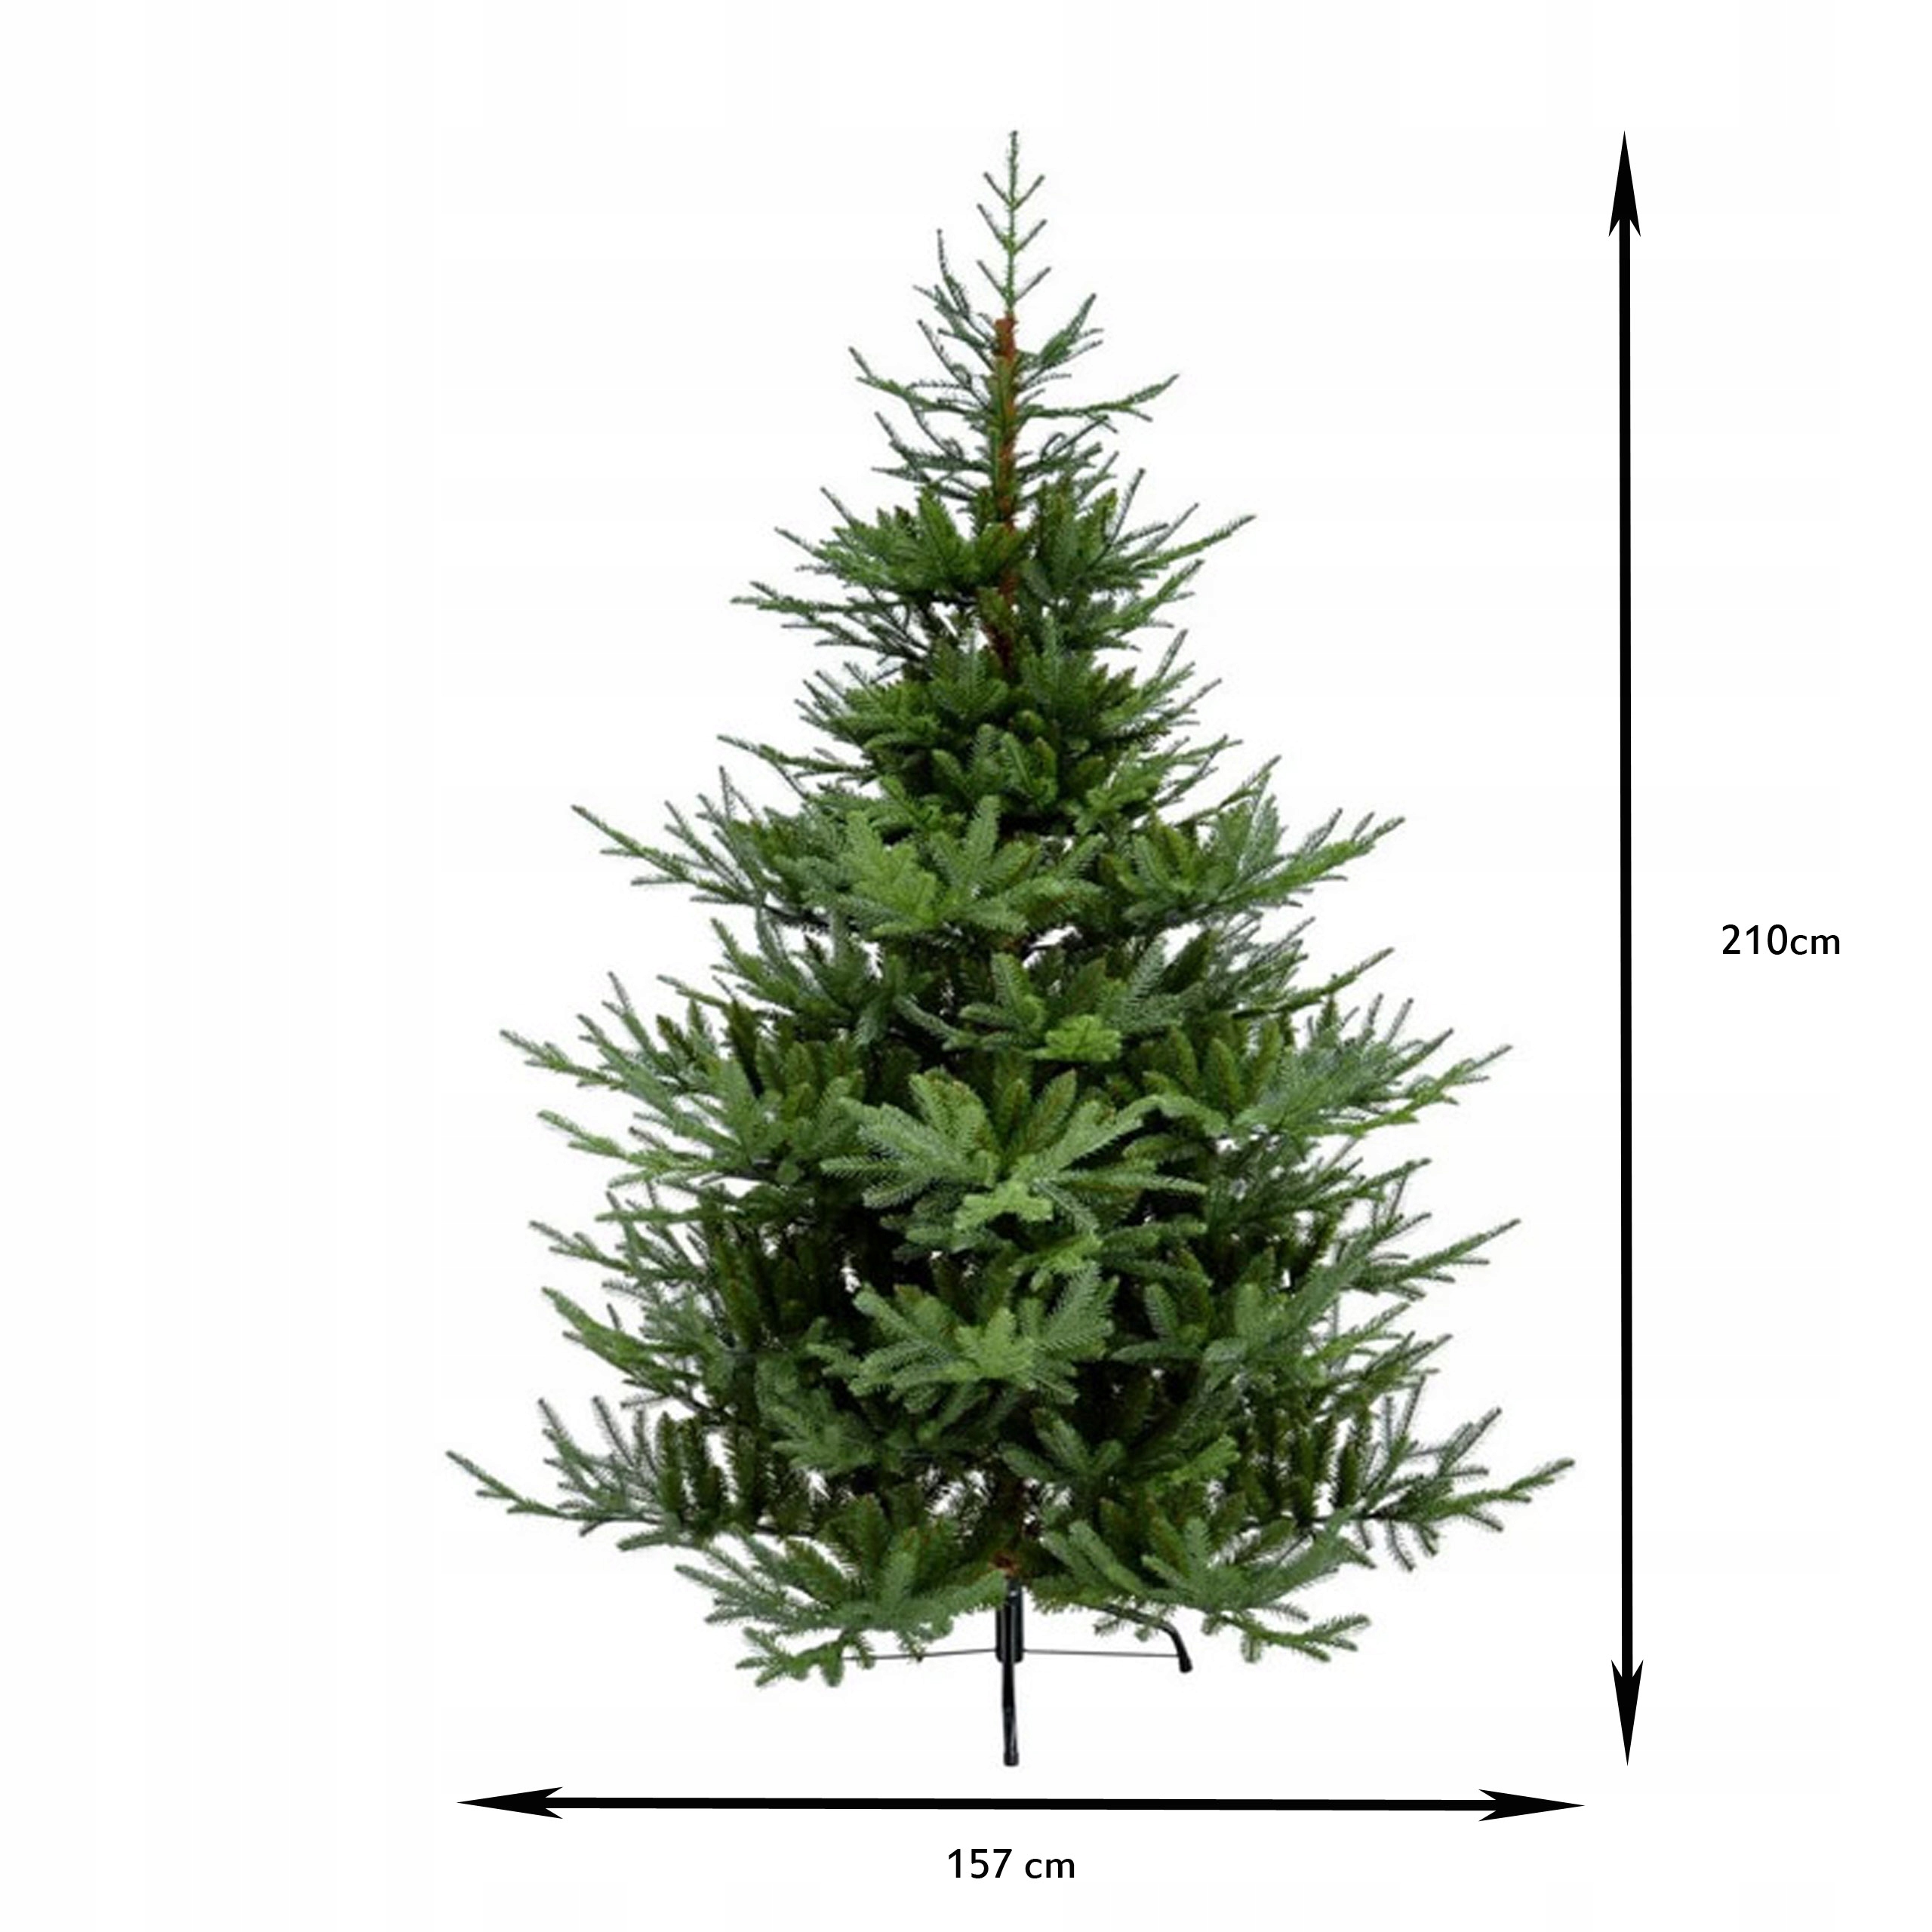 ARTIFICIAL CHRISTMAS TREE LIKE A LIVING NATURAL LOOK 210CM + STAND Manufacturer's code CHRISTMAS TREE LIKE LIFE